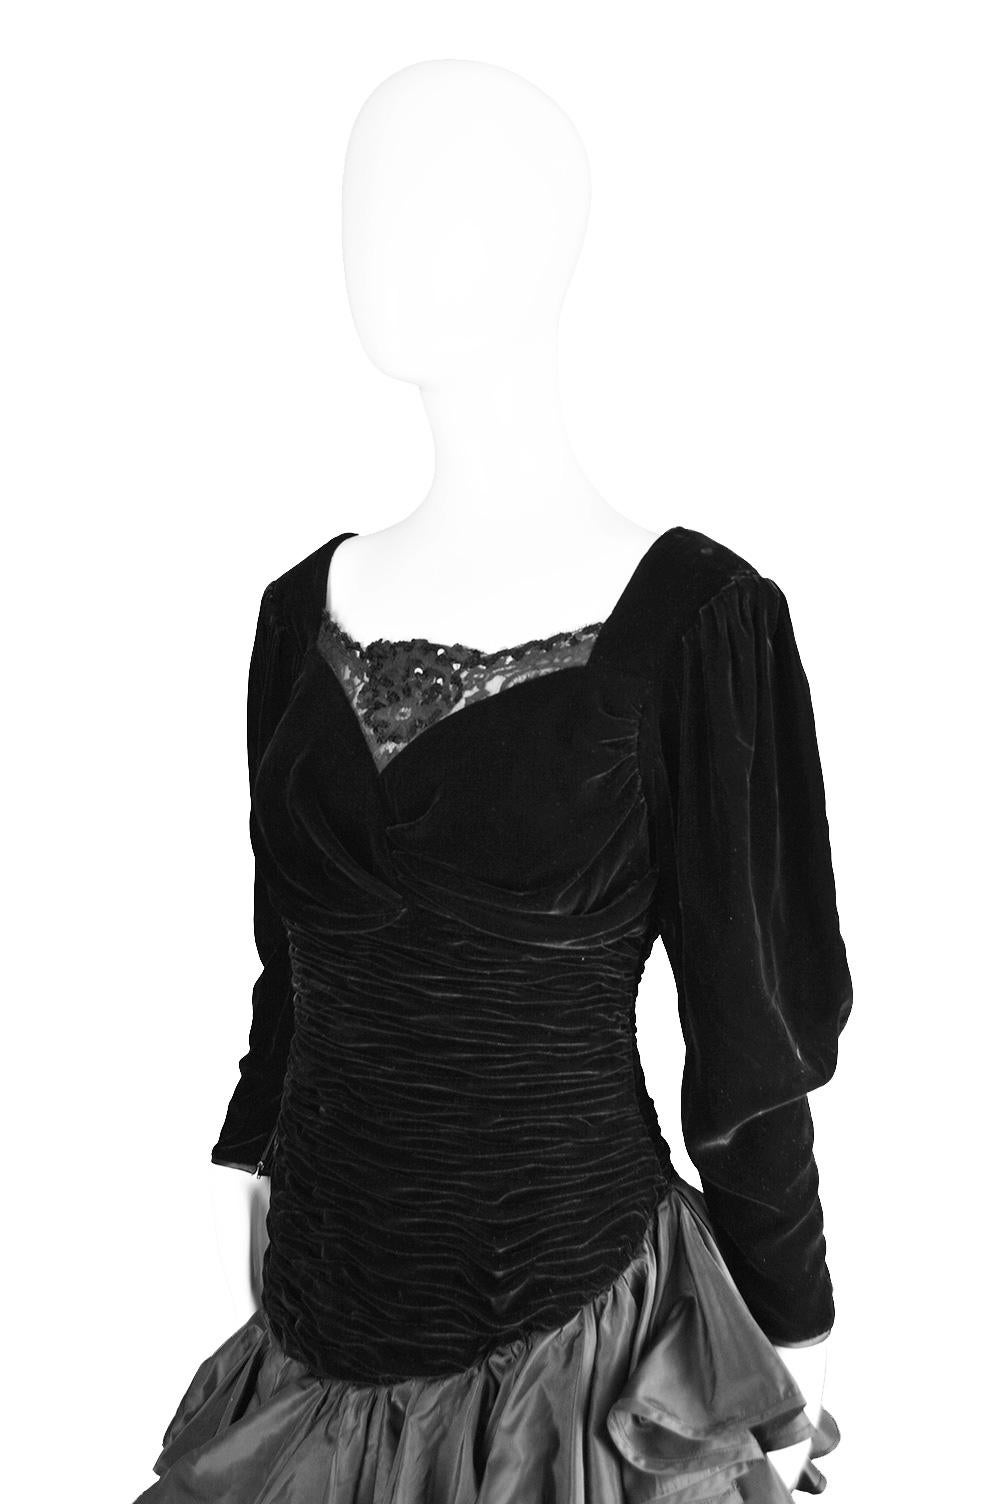 A fabulous vintage evening dress from the 80s by iconic, luxury French fashion designer, Emanuel Ungaro. In a black velvet with asymmetric black taffeta ruffles on the skirt and flattering ruching on the bodice. The neckline and the back have a